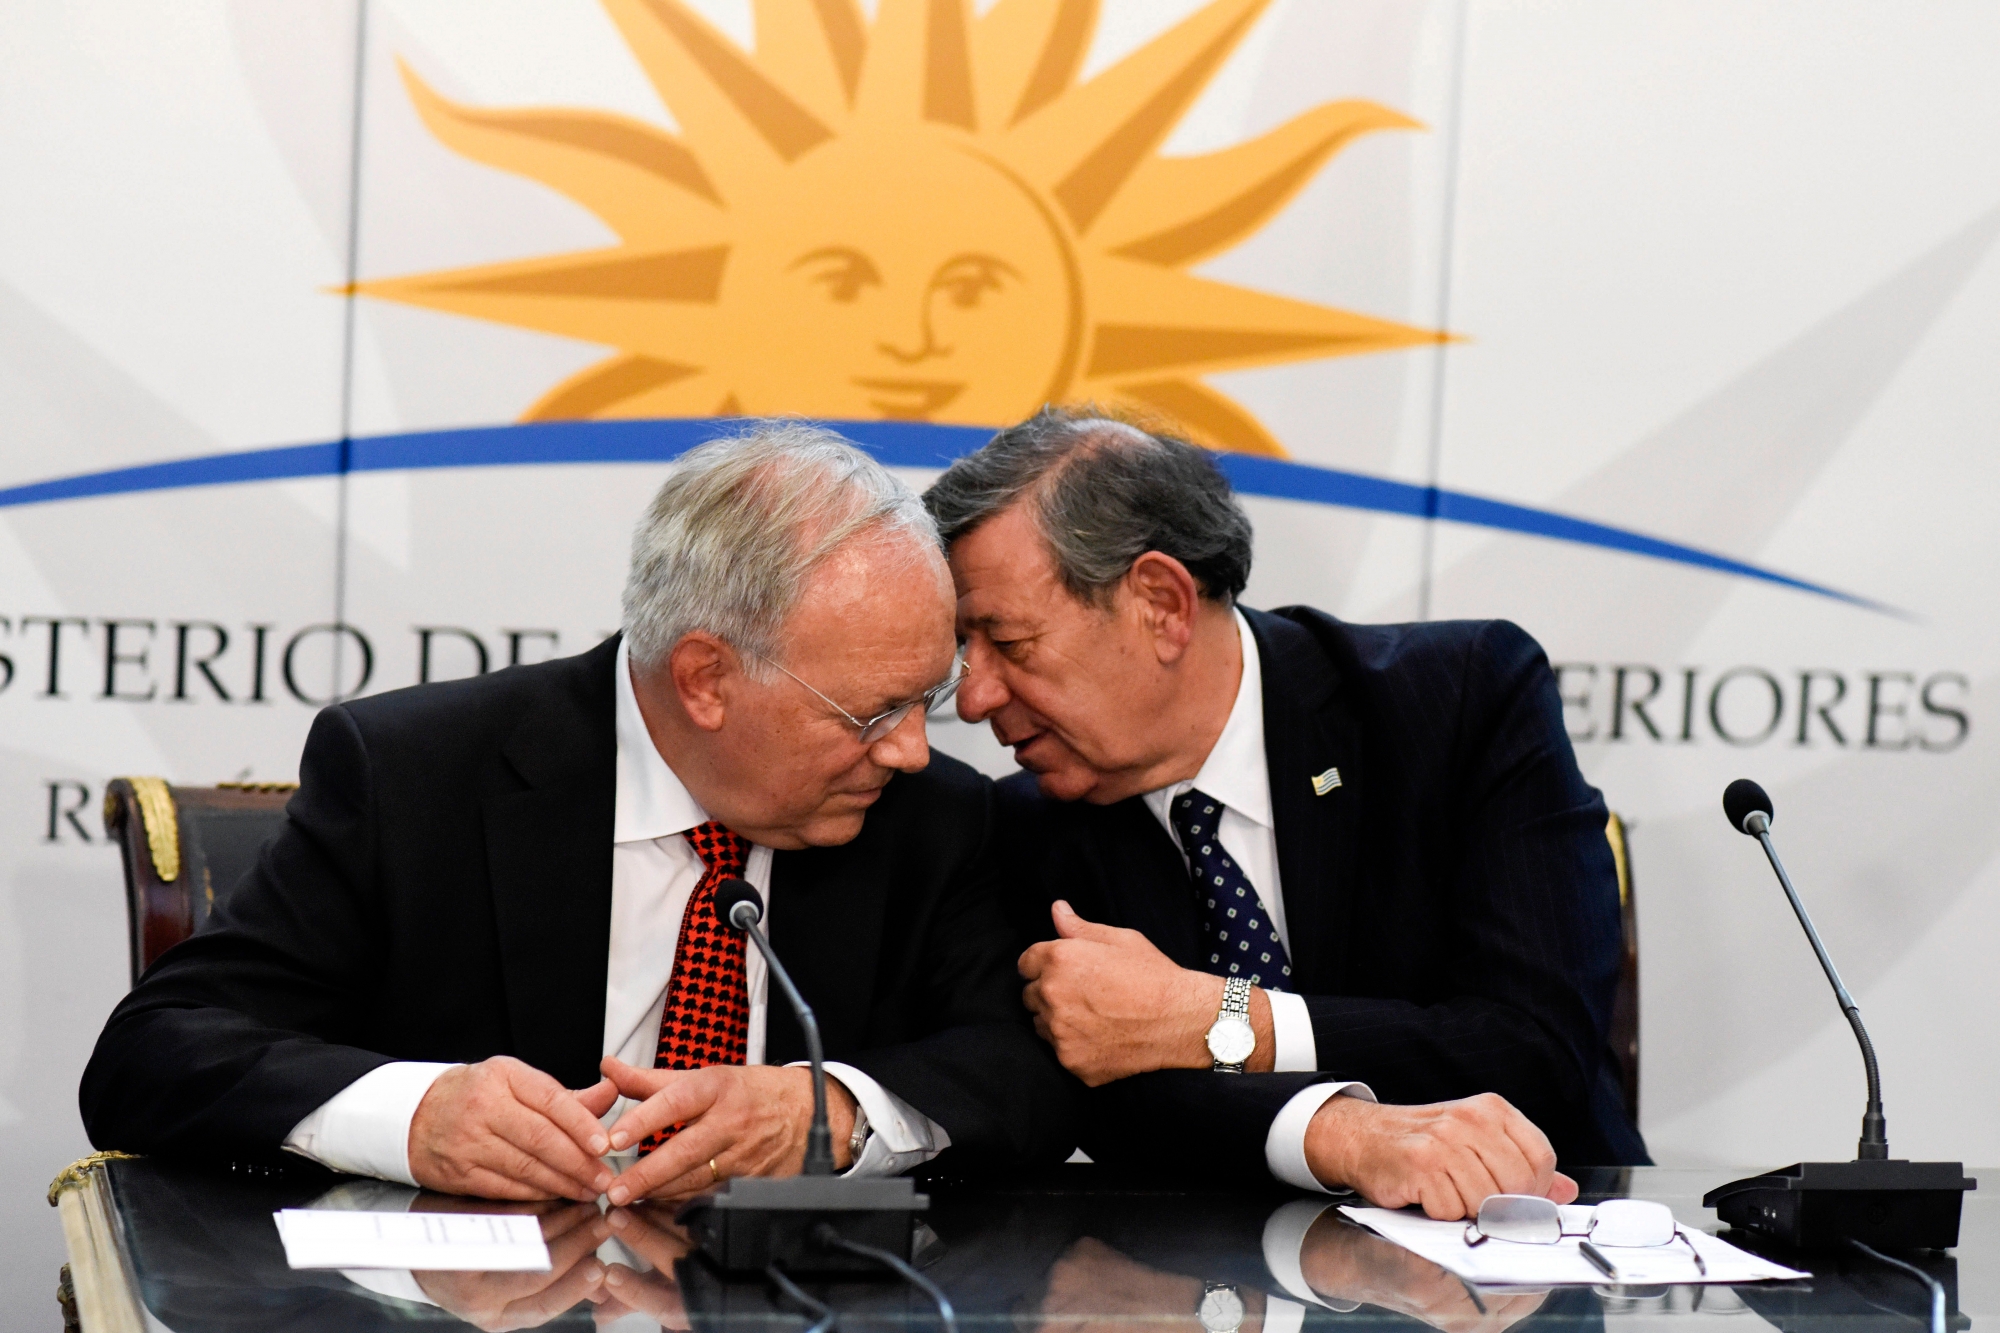 Swiss Federal Councillor Johann Schneider-Ammann, left, speaks with Uruguay's Foreign Minister Rodolfo Nin in a press conference, during an official visit in Montevideo, Uruguay,Thursday, May 3, 2018. Schneider-Ammann is on a visit to Mercosur trade partners. (AP Photo/Matilde Campodonico) Uruguay Switzerland Schneider-Ammann